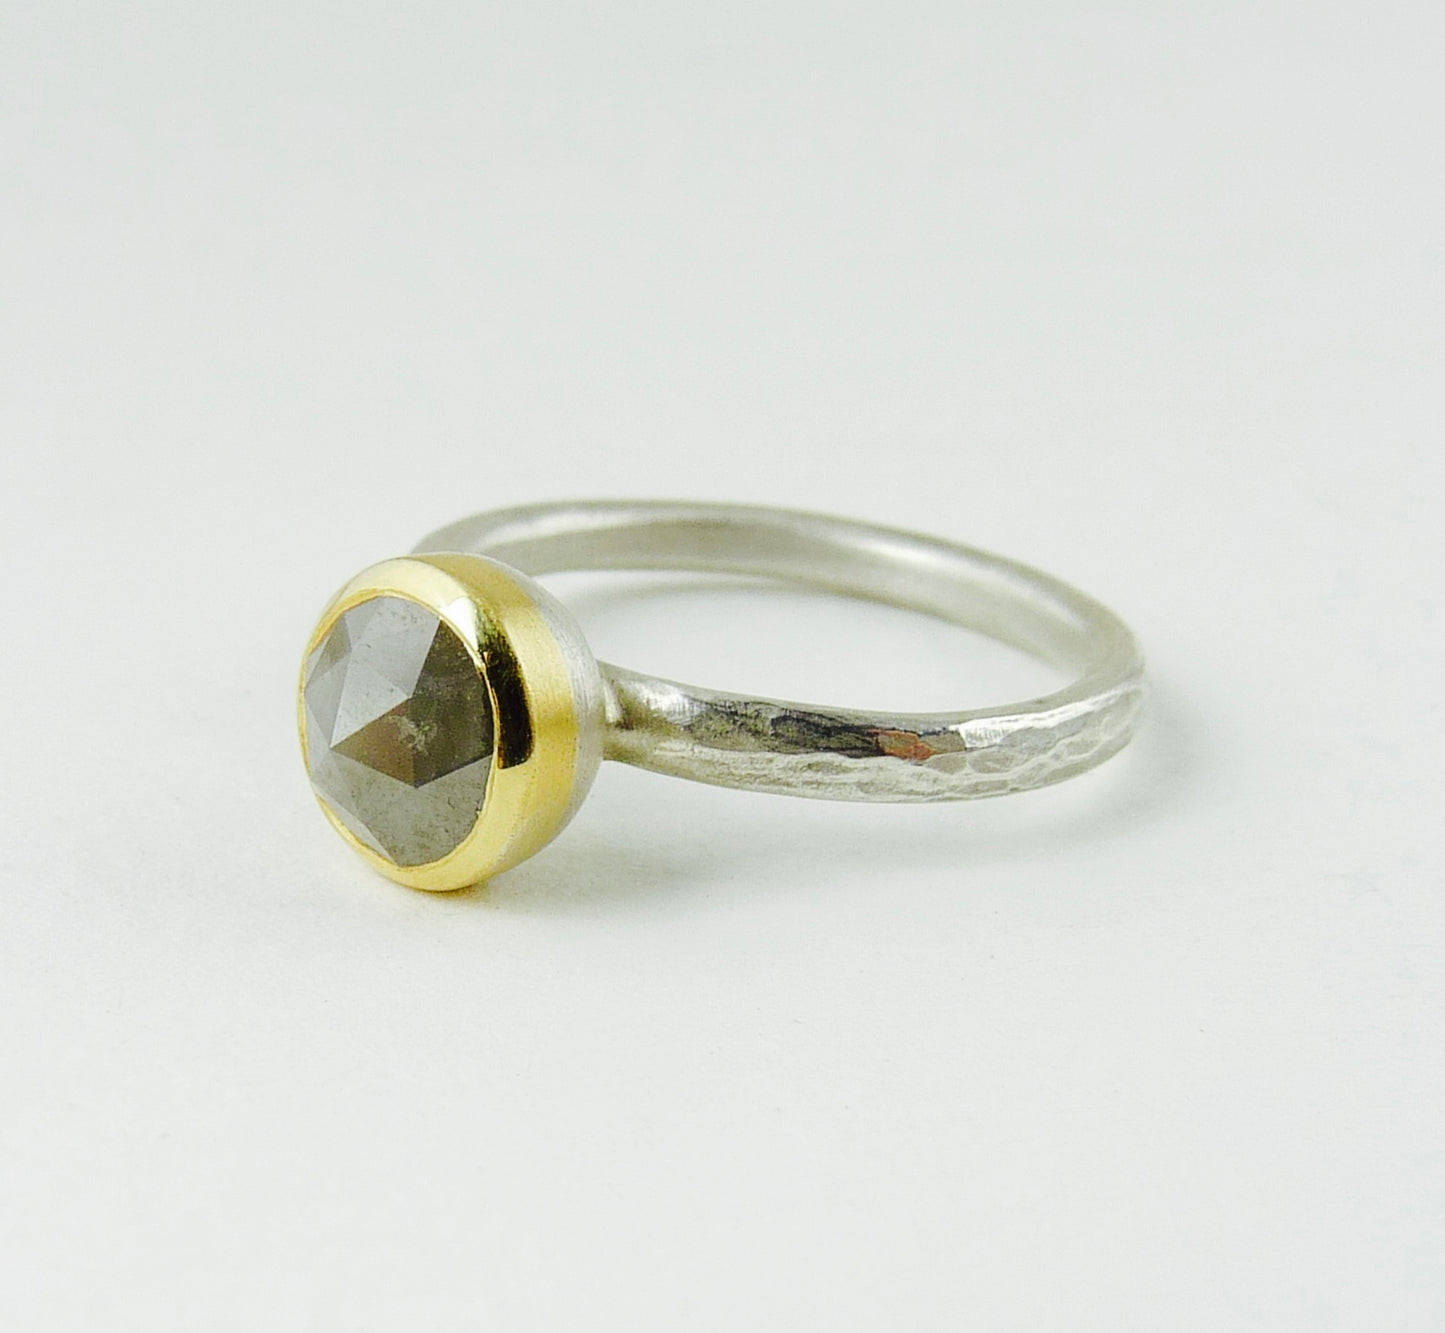 Rose Cut Grey Diamond set in 18ct Gold and Silver